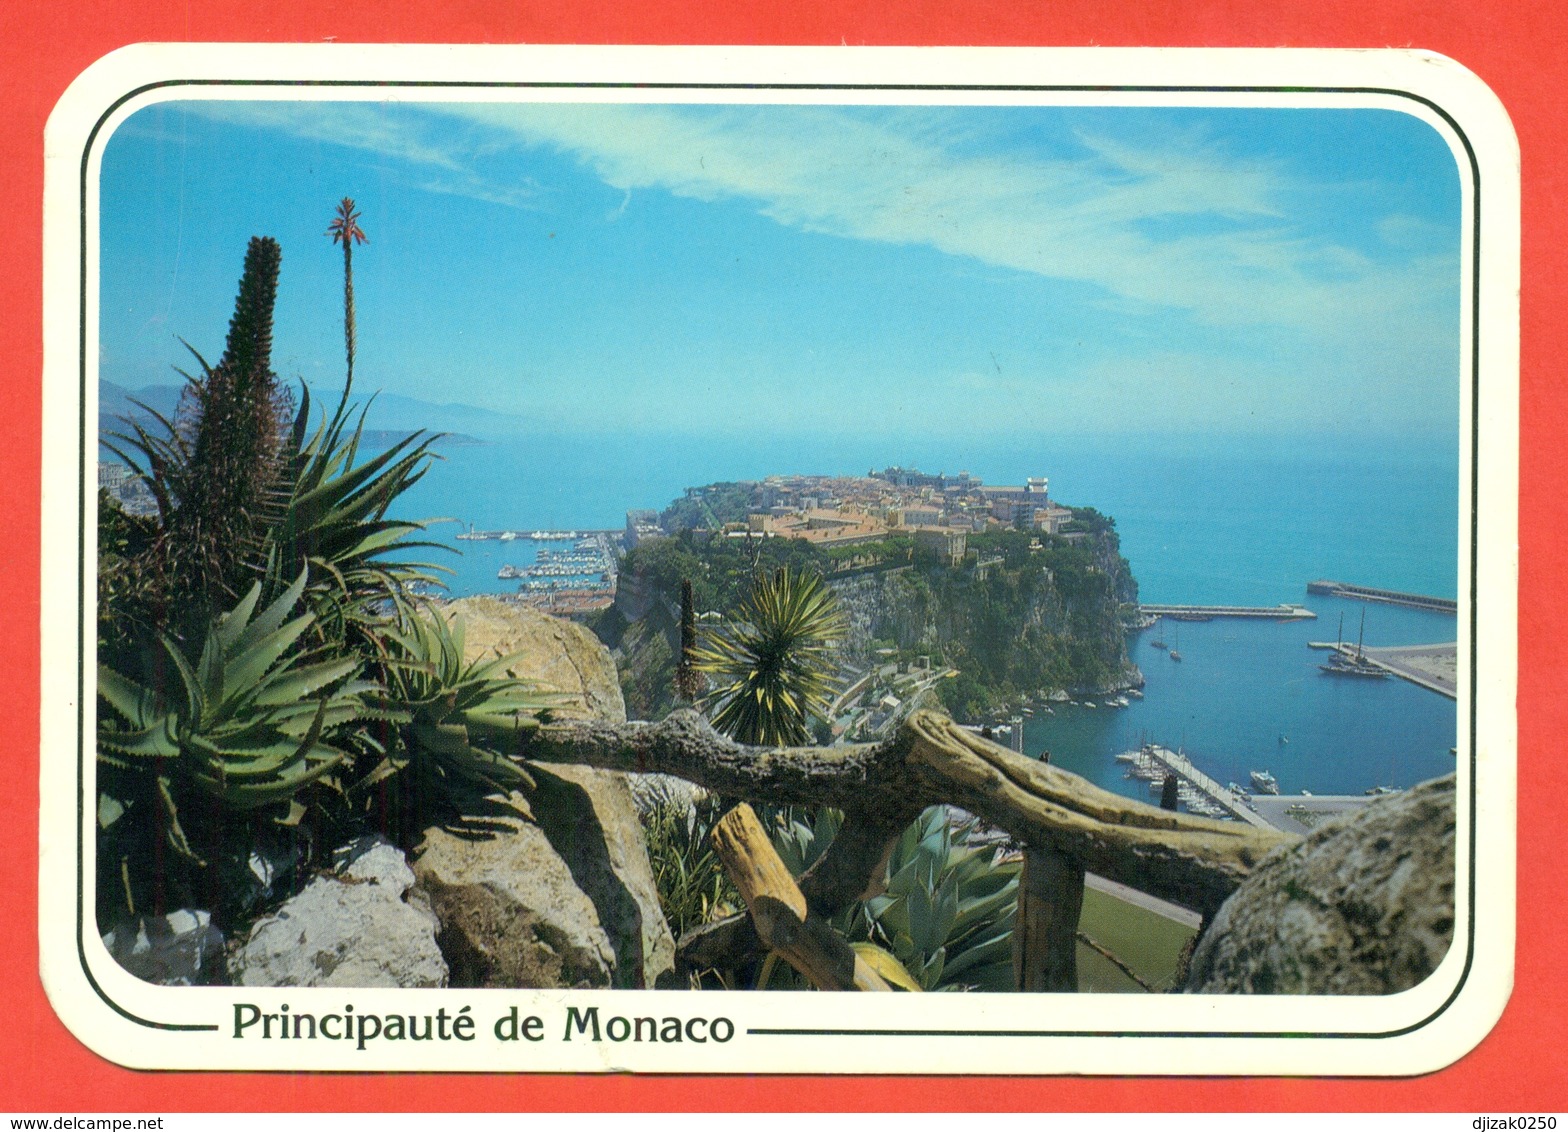 Monaco 1985. Cactusses. Postcard Passed Mail With A Special Stamp. - Cactus